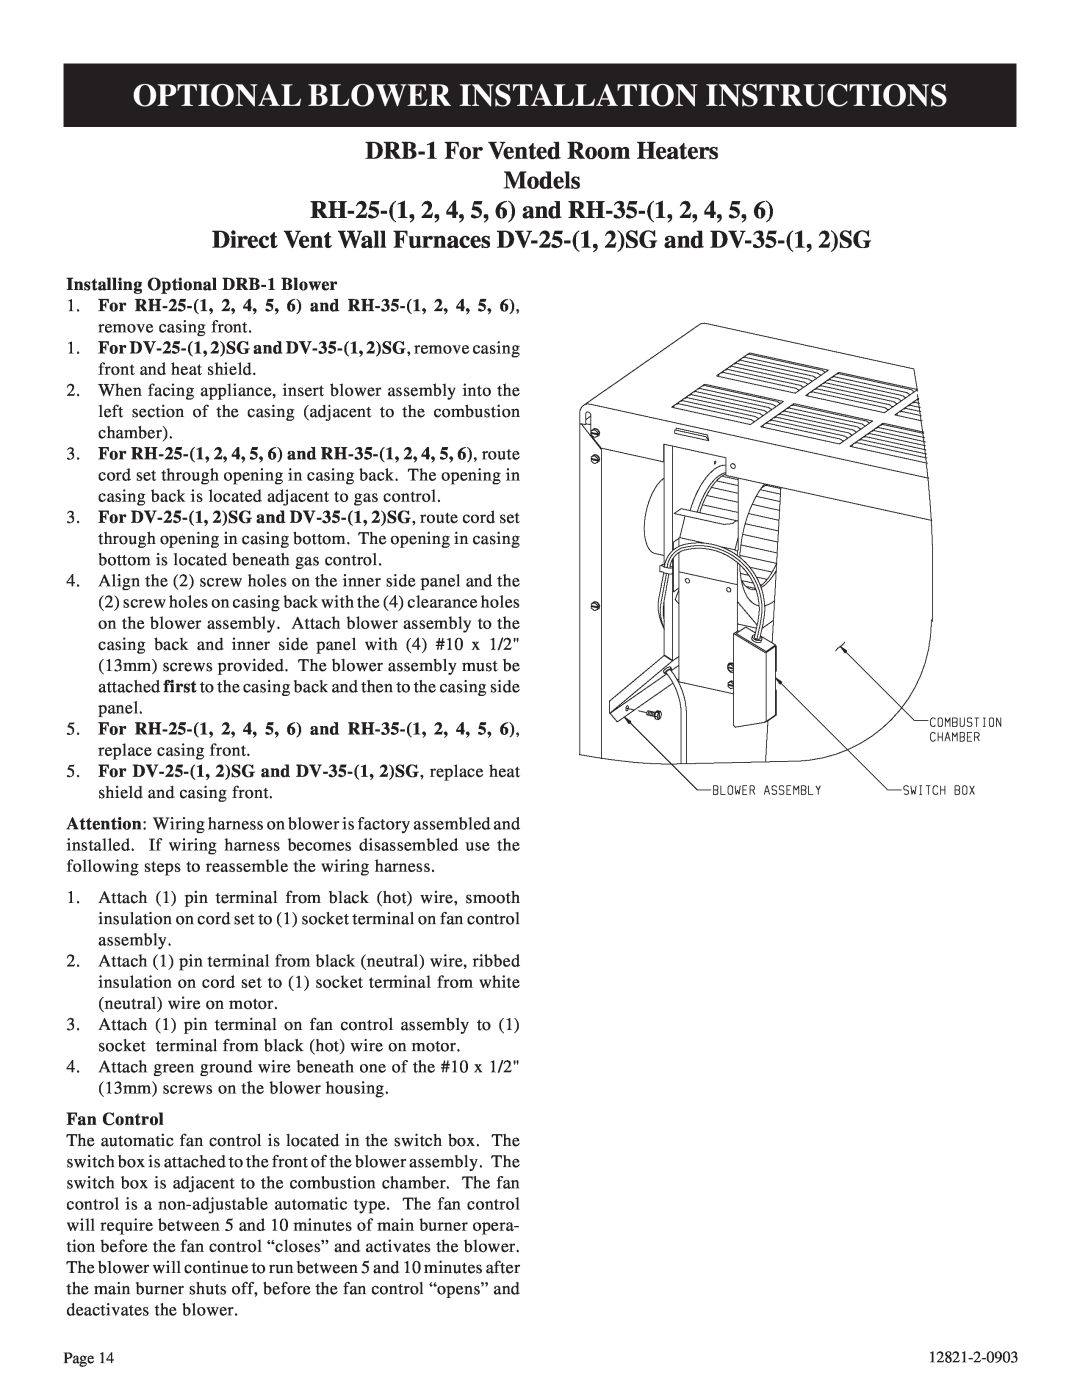 Empire Products RH-35-6, RH-25-6 Optional Blower Installation Instructions, DRB-1For Vented Room Heaters Models 